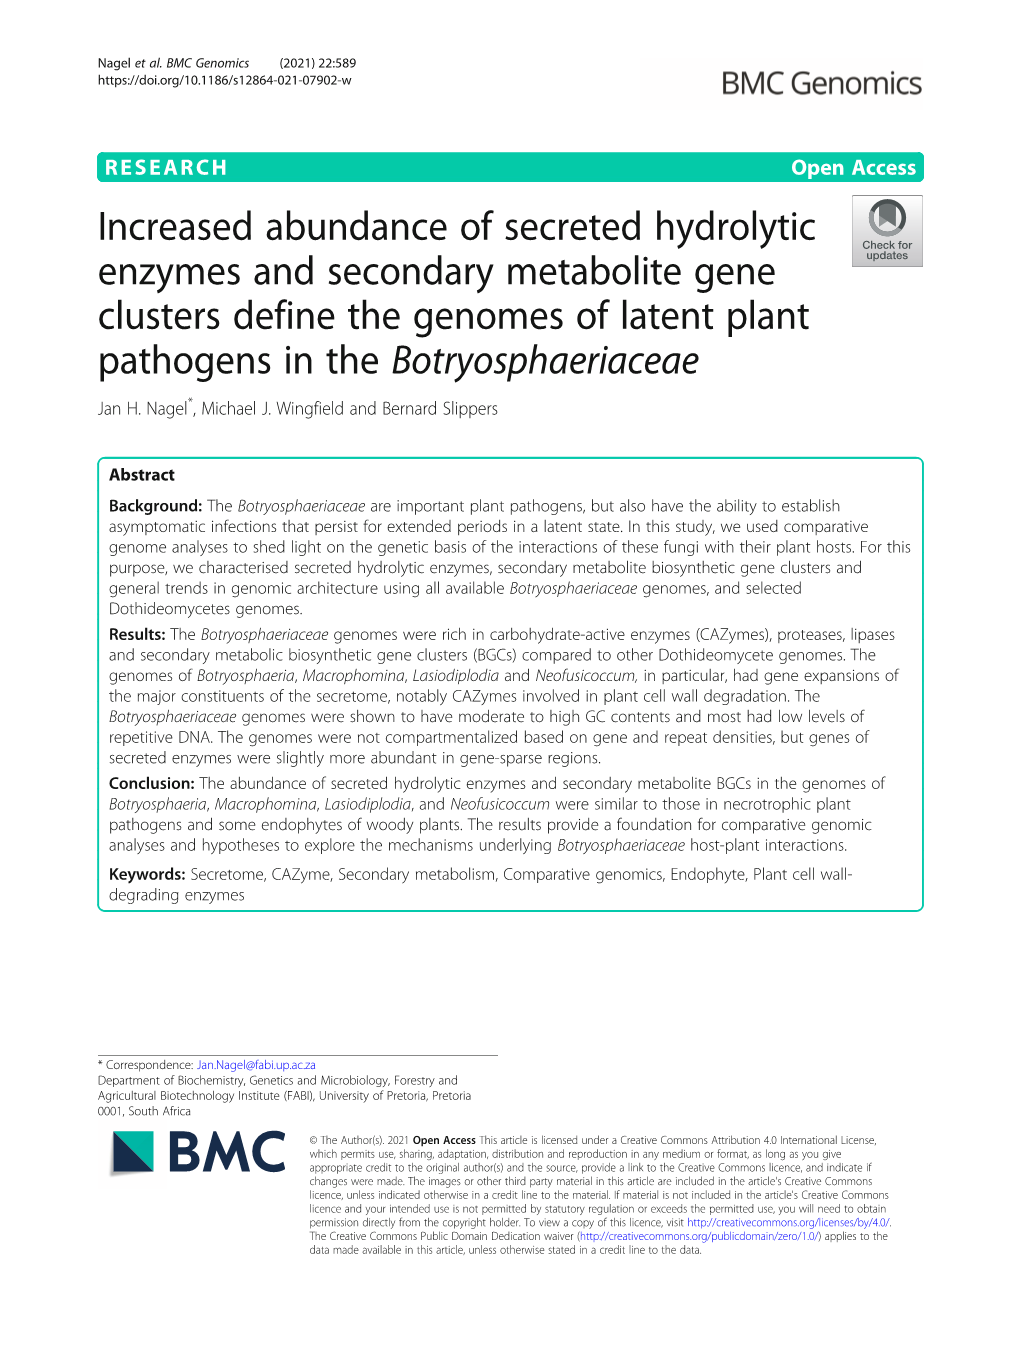 Increased Abundance of Secreted Hydrolytic Enzymes and Secondary Metabolite Gene Clusters Define the Genomes of Latent Plant Pathogens in the Botryosphaeriaceae Jan H